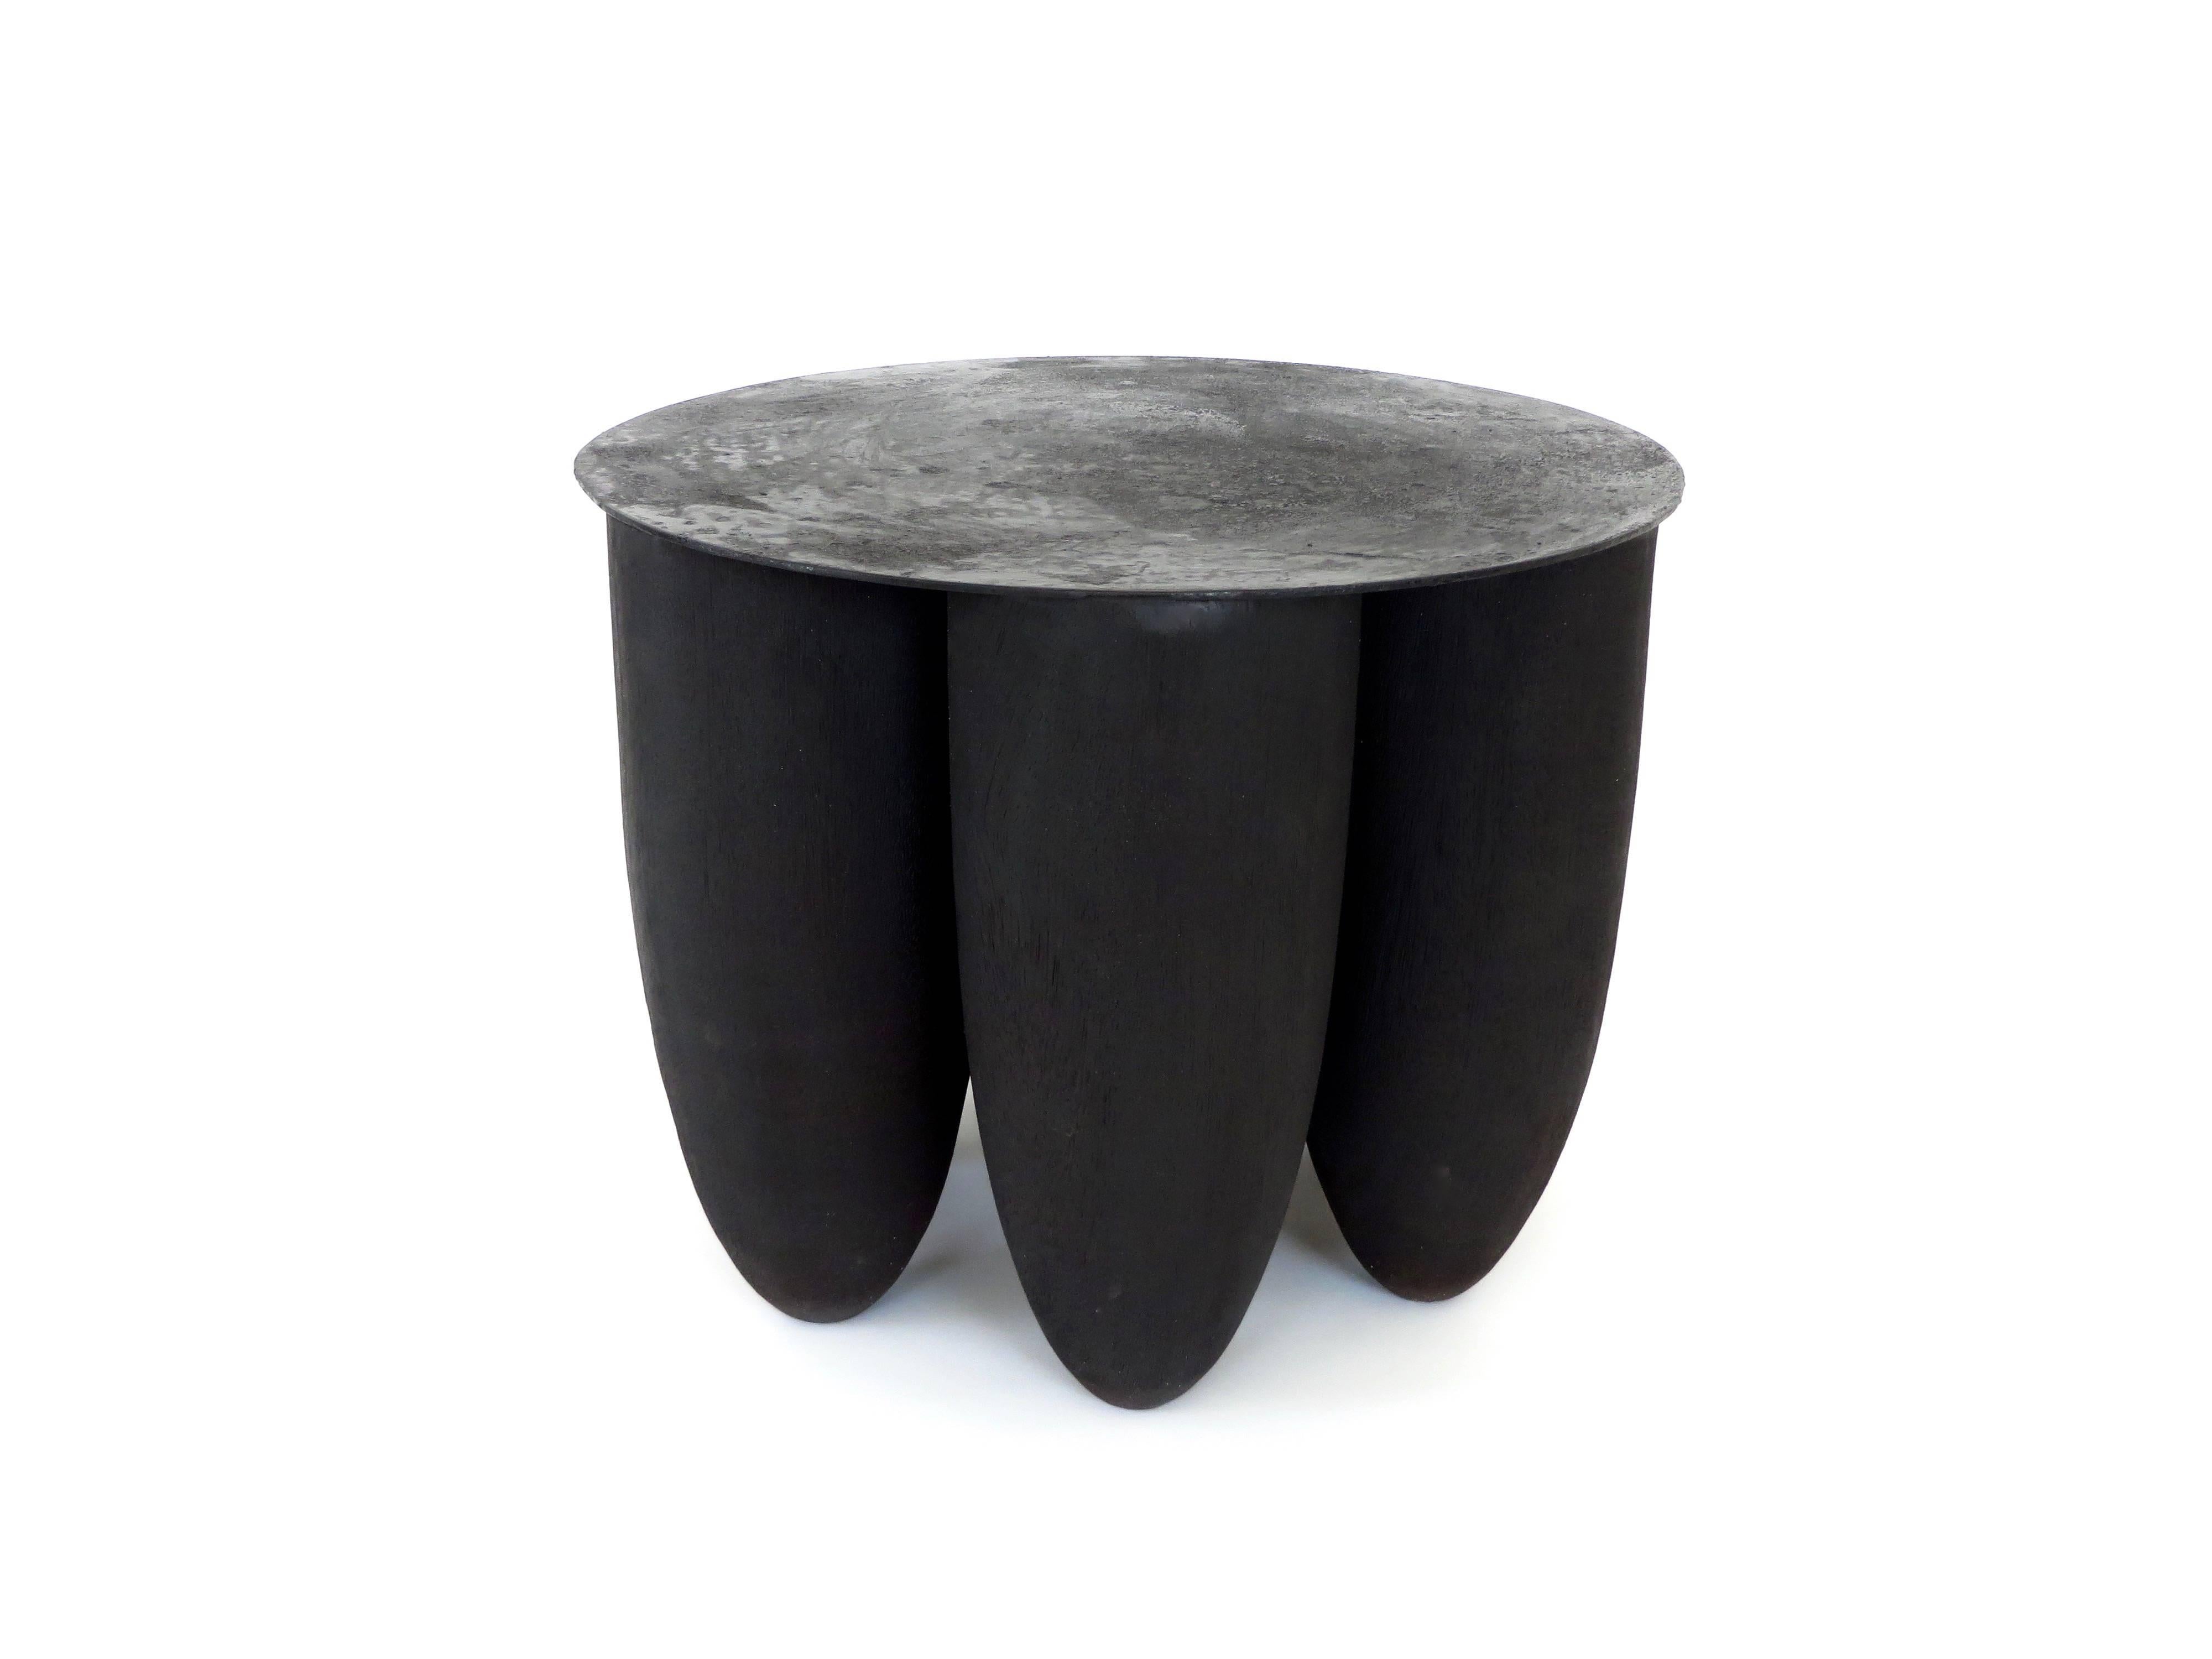 Black Iroko wood and burned steel seven leg signed low coffee table or side table or stool by Belgian designer Arno Declercq.
A Belgian designer and art dealer who makes bespoke objects for interiors with passion for design, atmosphere, history and